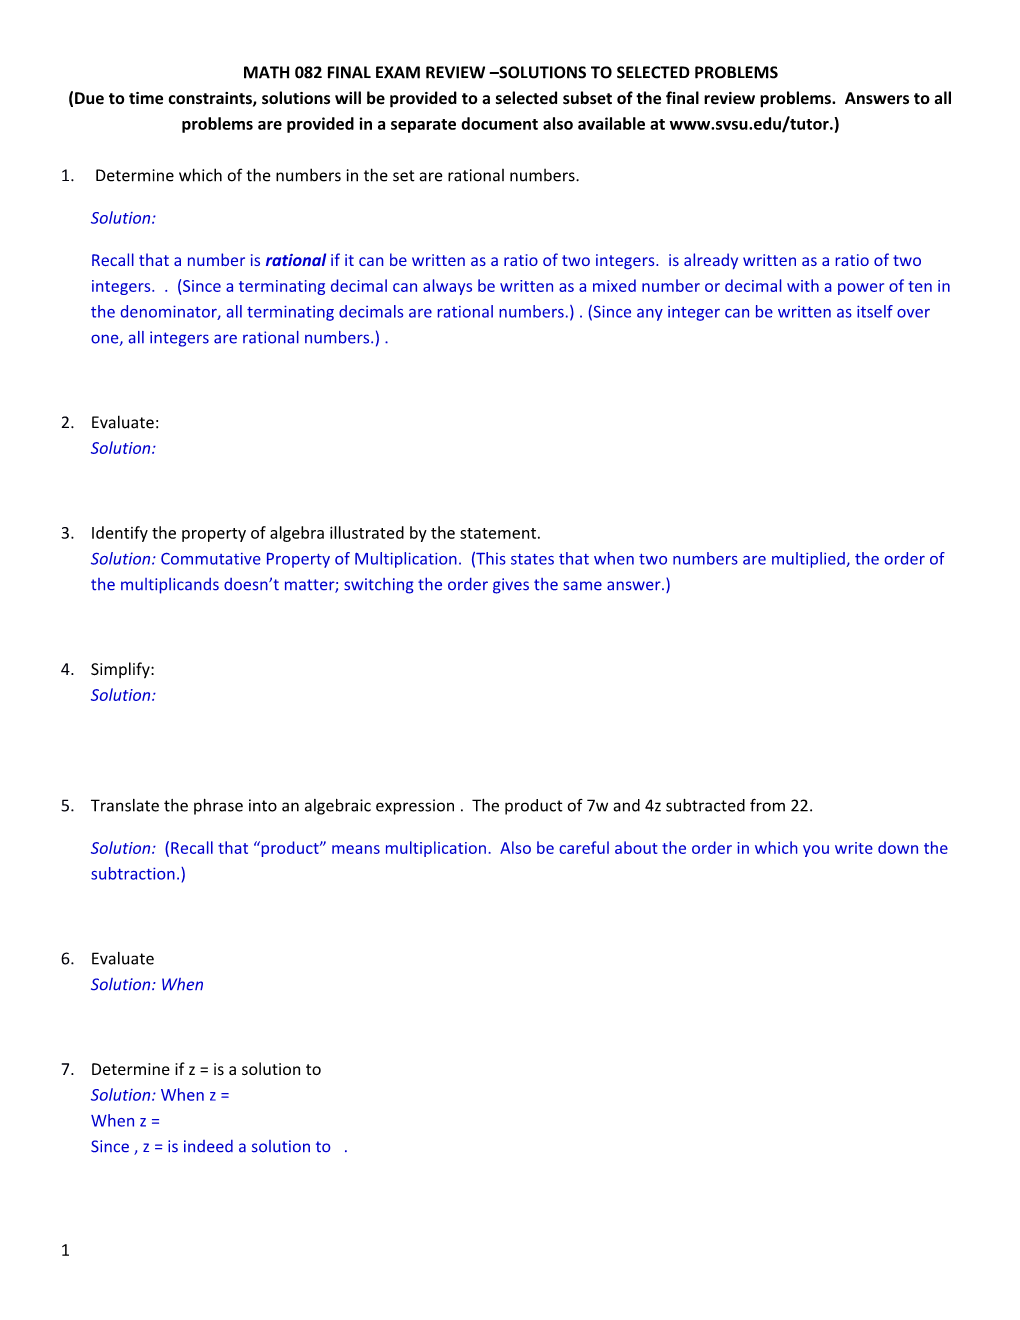 MATH 082 FINAL EXAM REVIEW SOLUTIONS to SELECTED PROBLEMS (Due to Time Constraints, Solutions